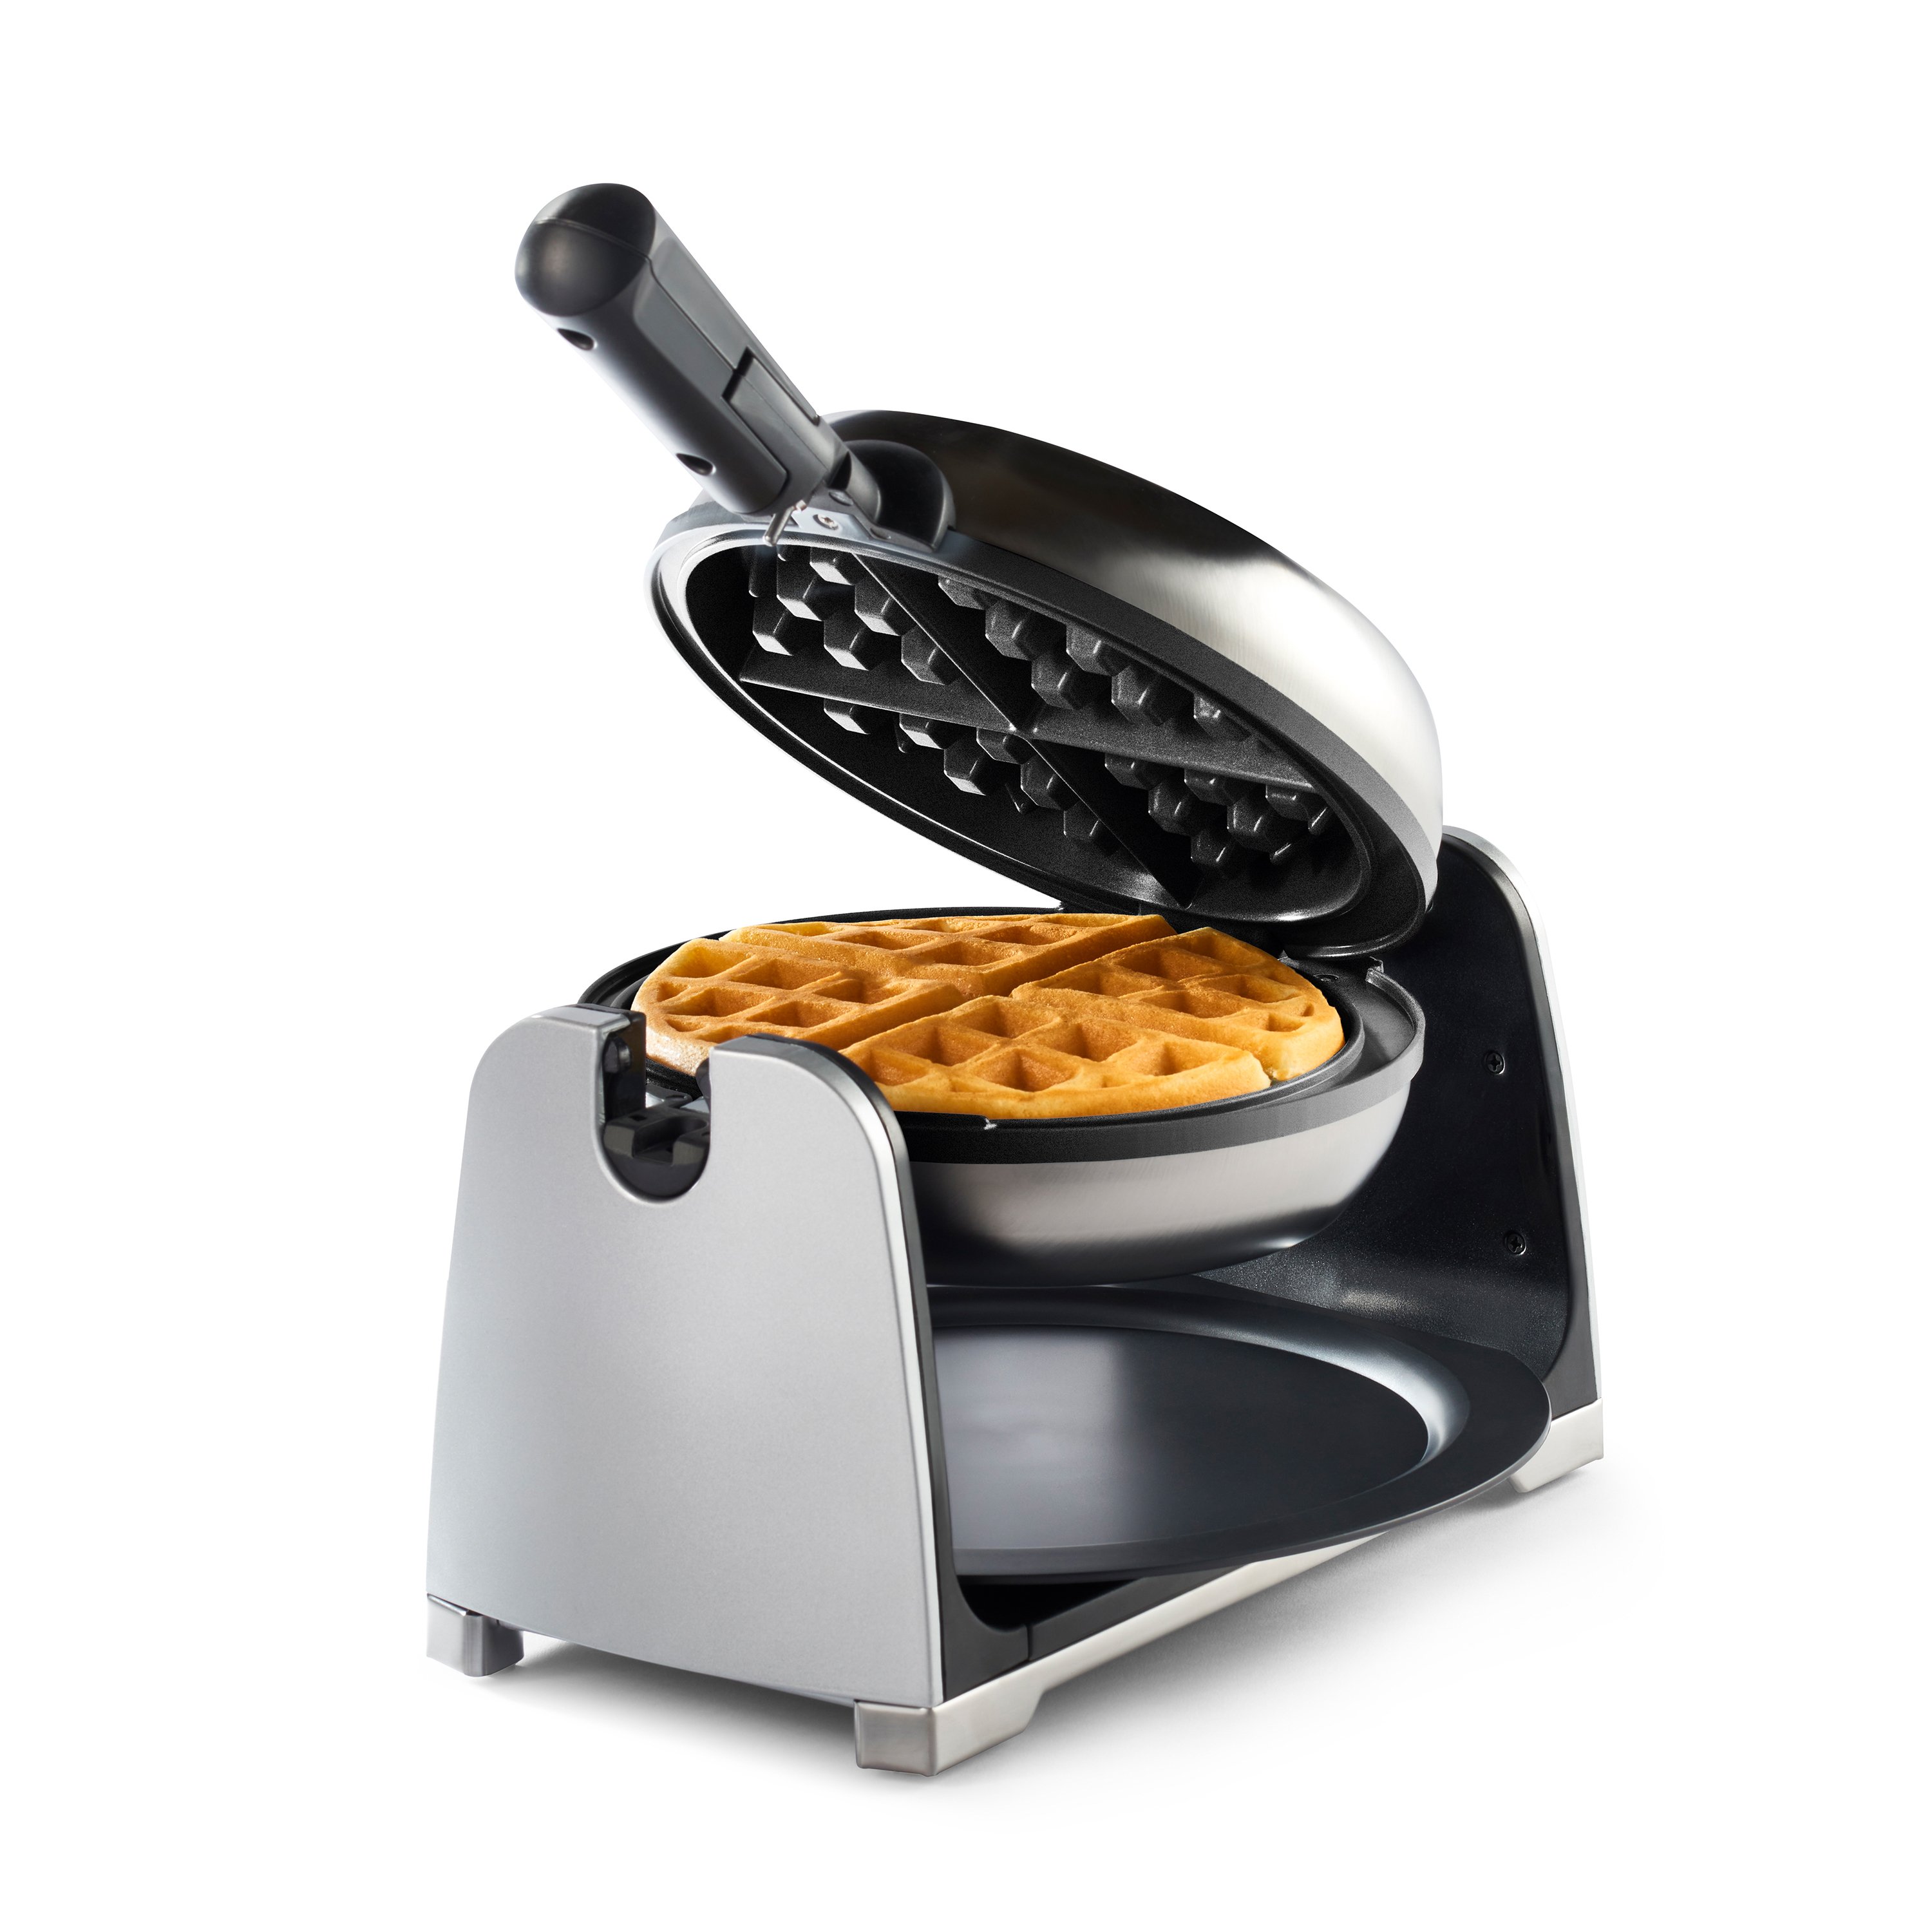 Making waffle Bowls in my Mini Waffle Bowl Maker and Unboxing 